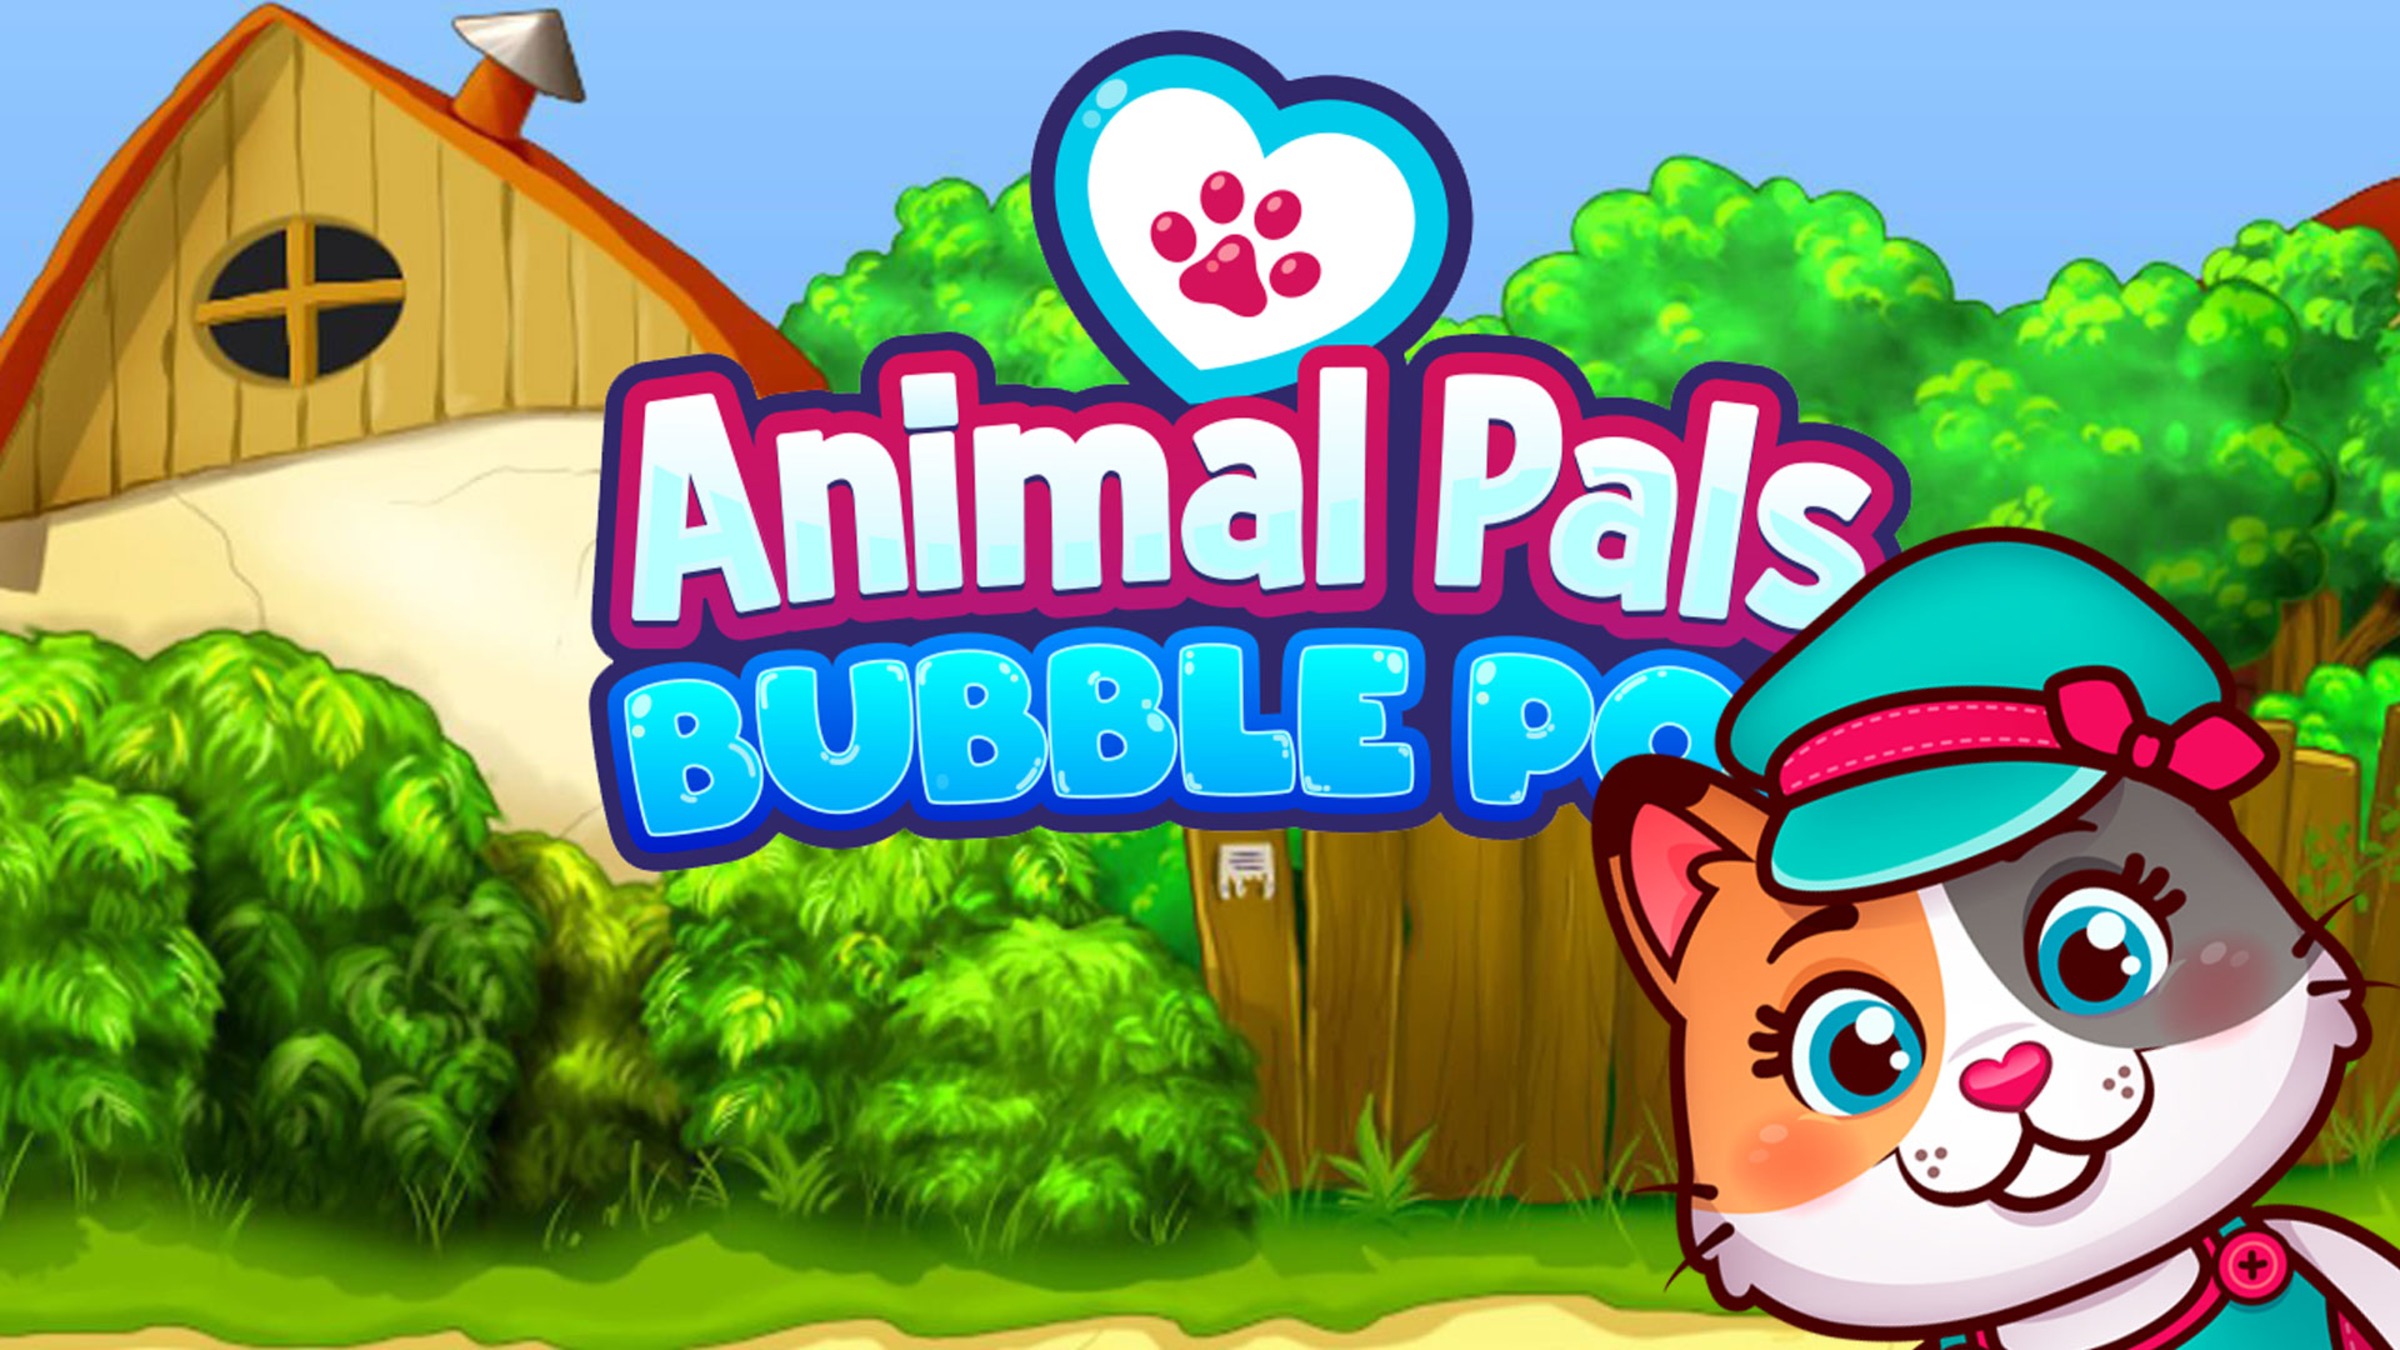 Animal Pals Bubble Pop for Nintendo Switch